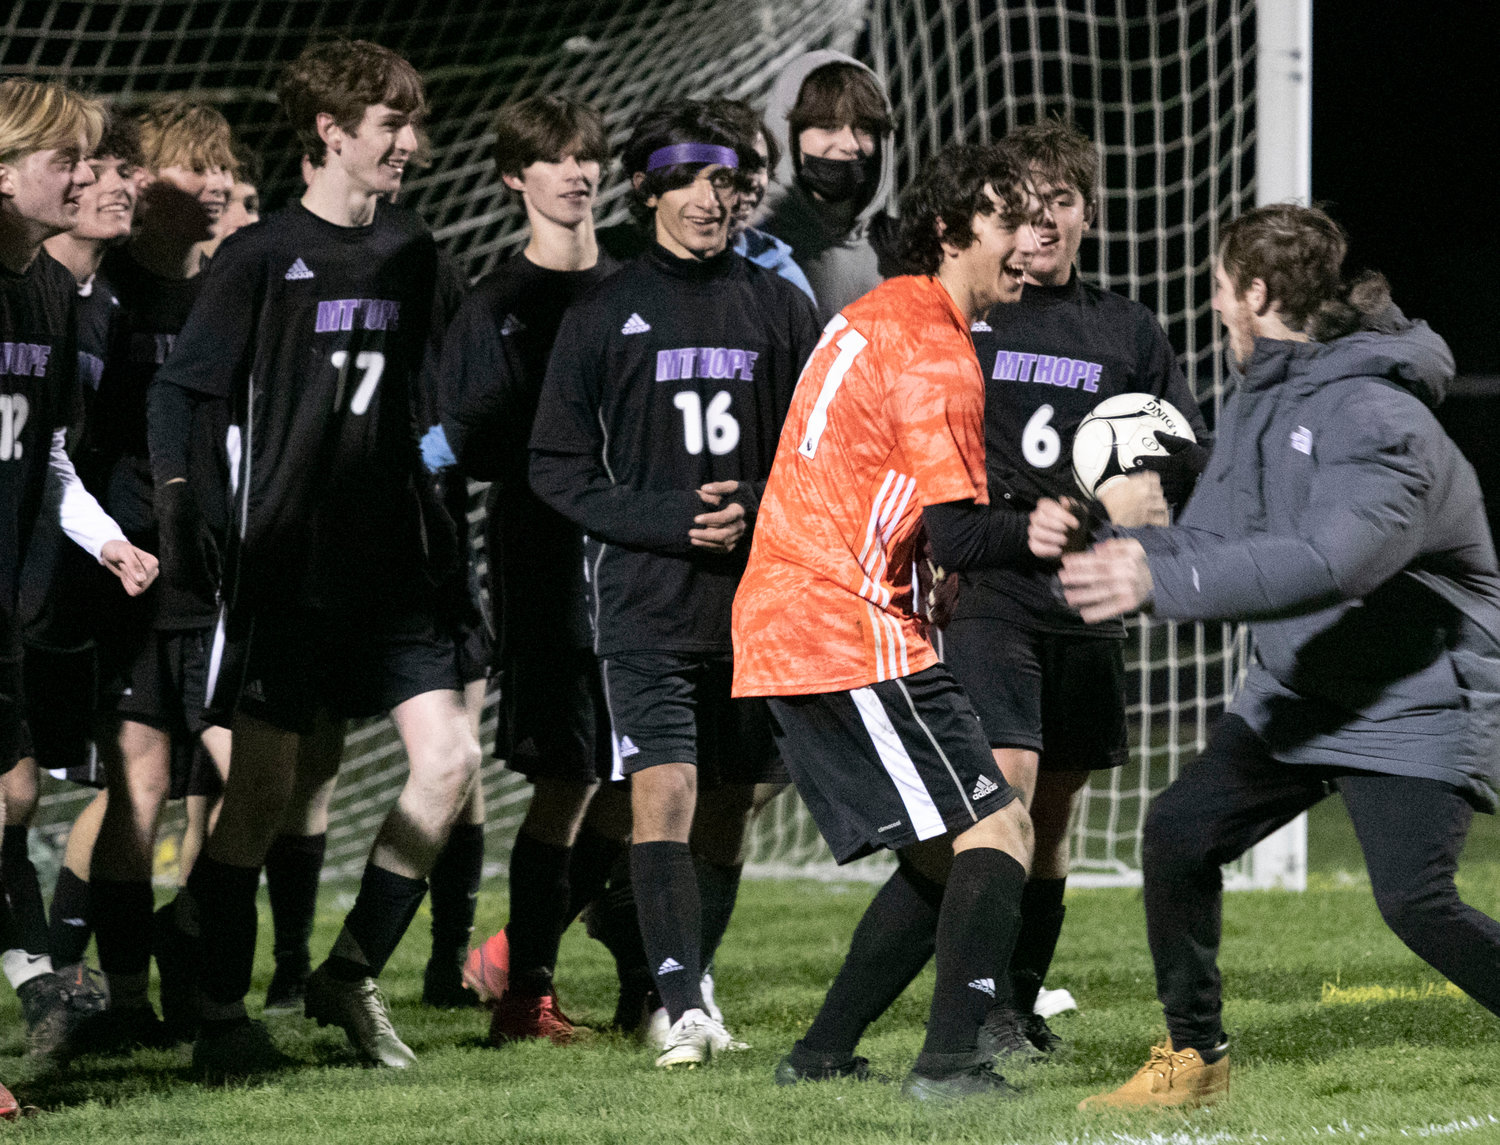 Goalkeeper Matt Terceiro (middle) and teammates celebrate with Jake Marshall after the game.